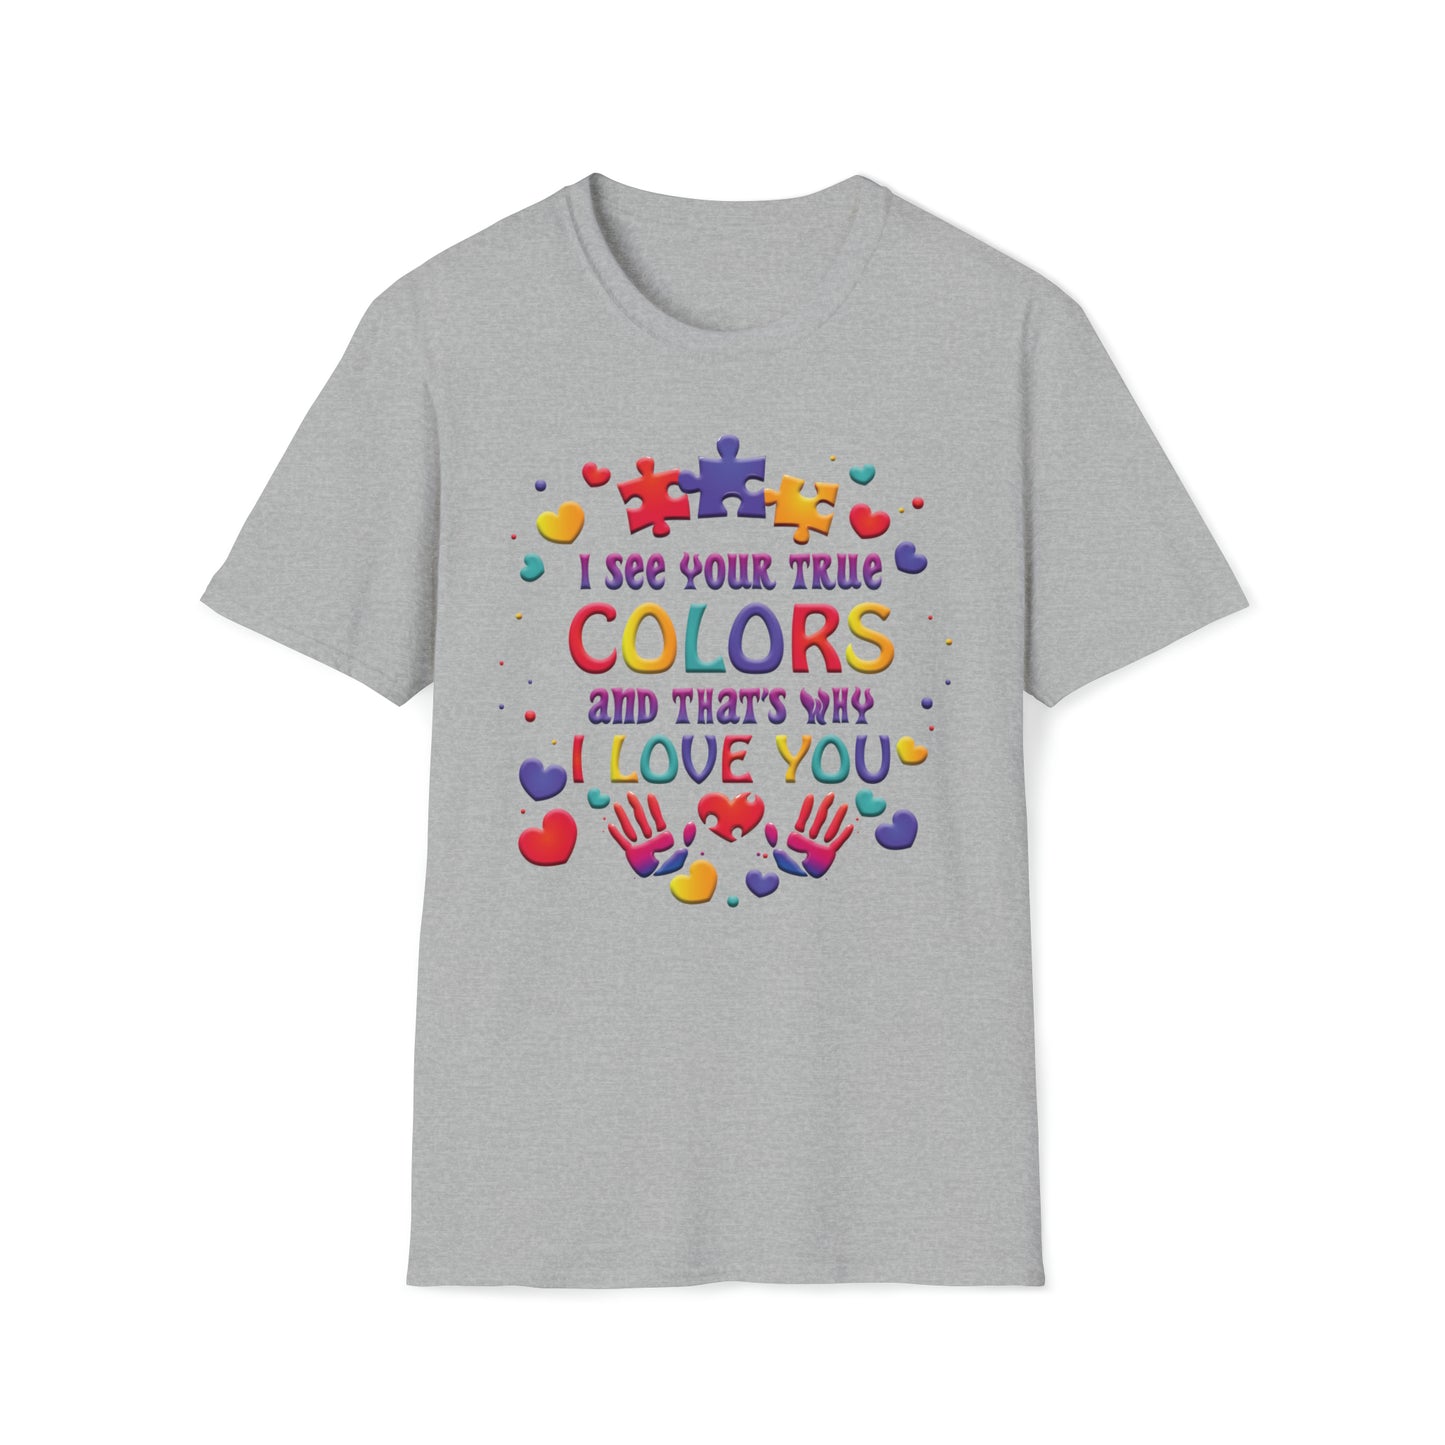 I See Your True Colors and That's Why I Love You - Unisex Softstyle T-Shirt - OCDandApparel